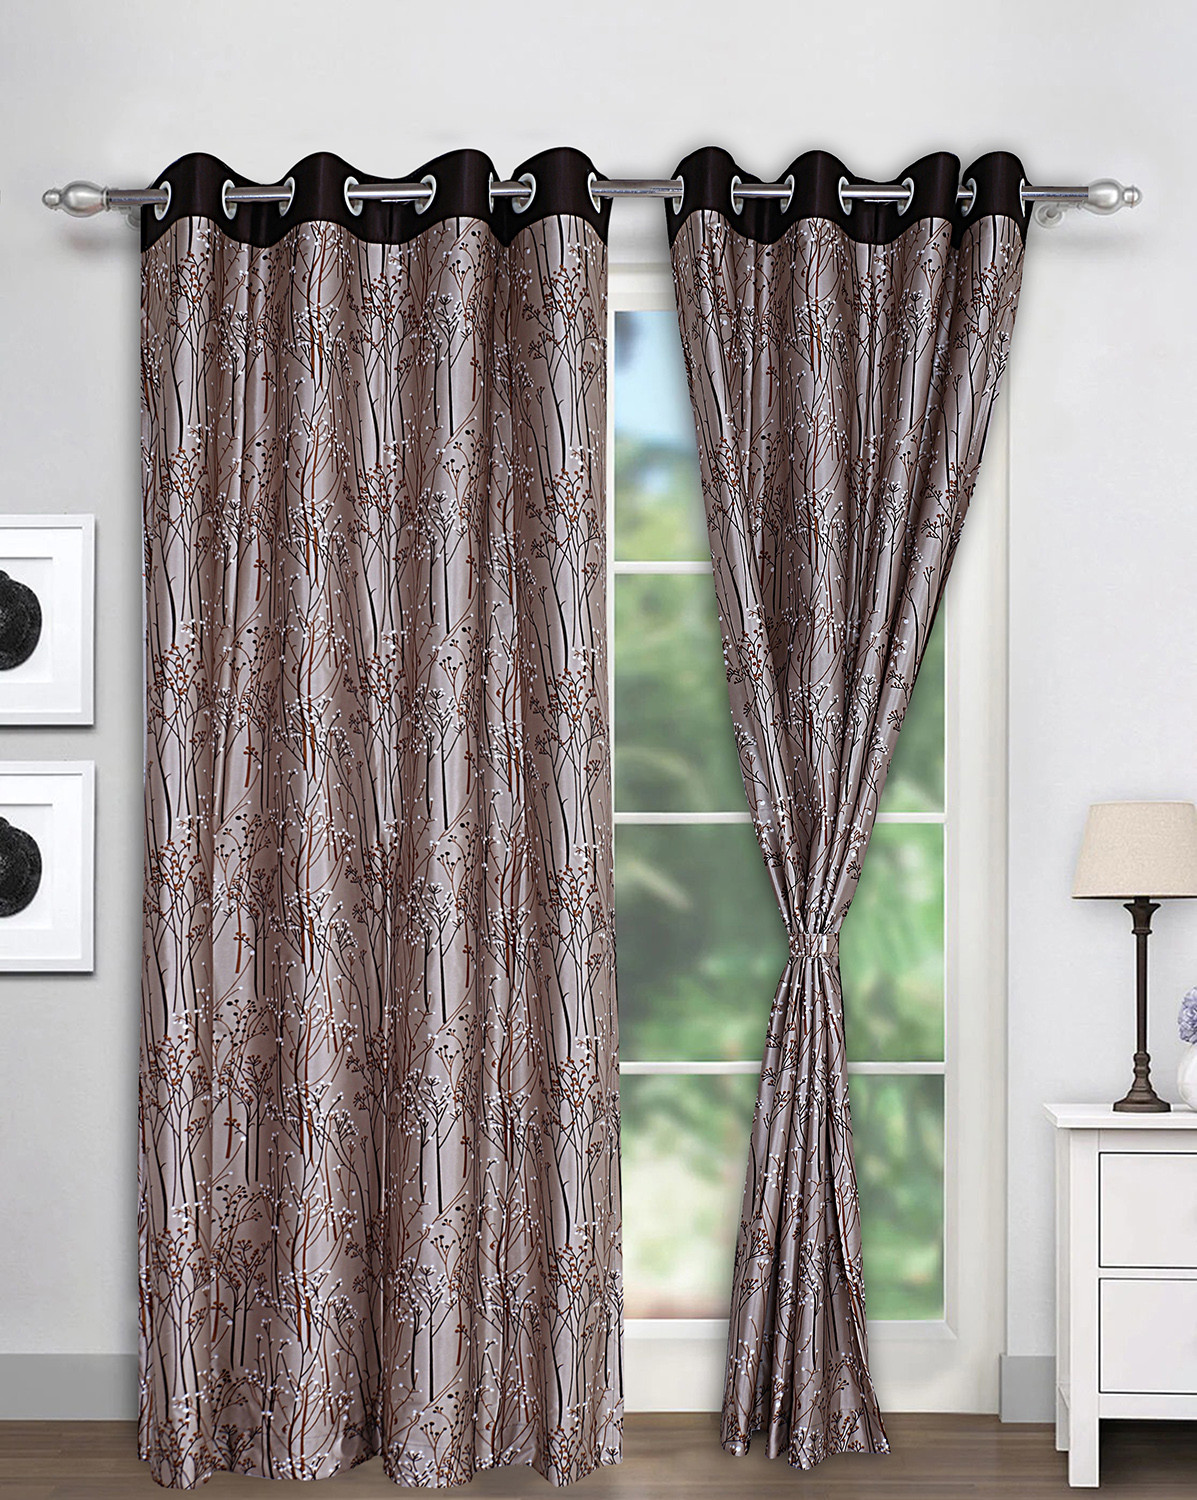 Kuber Industries Polyester Decorative 9 Feet Long Door Curtain|Tree Branches Print Blackout Drapes Curatin With 8 Eyelet For Home & Office (Coffee)